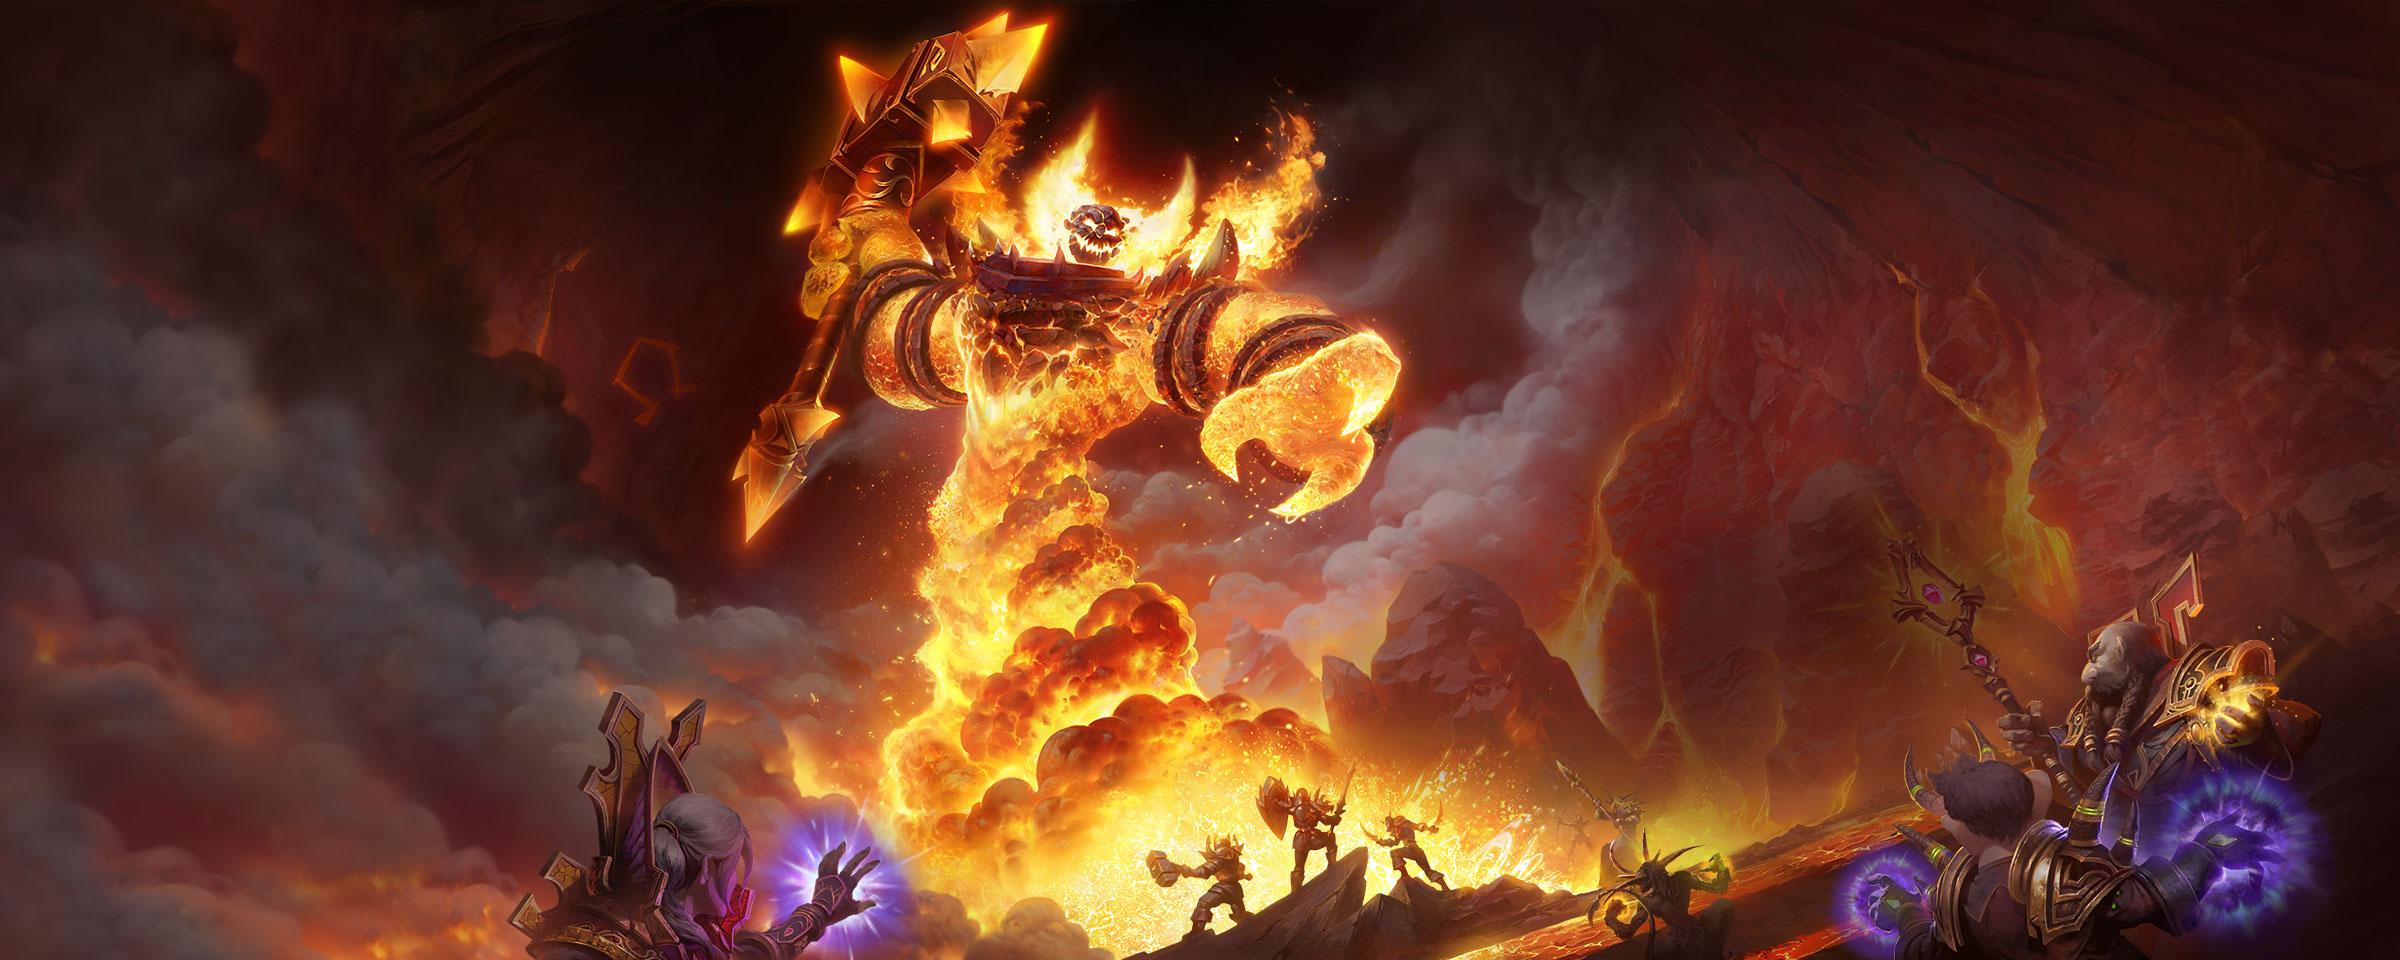 Here's the Classic WoW Ragnaros Background